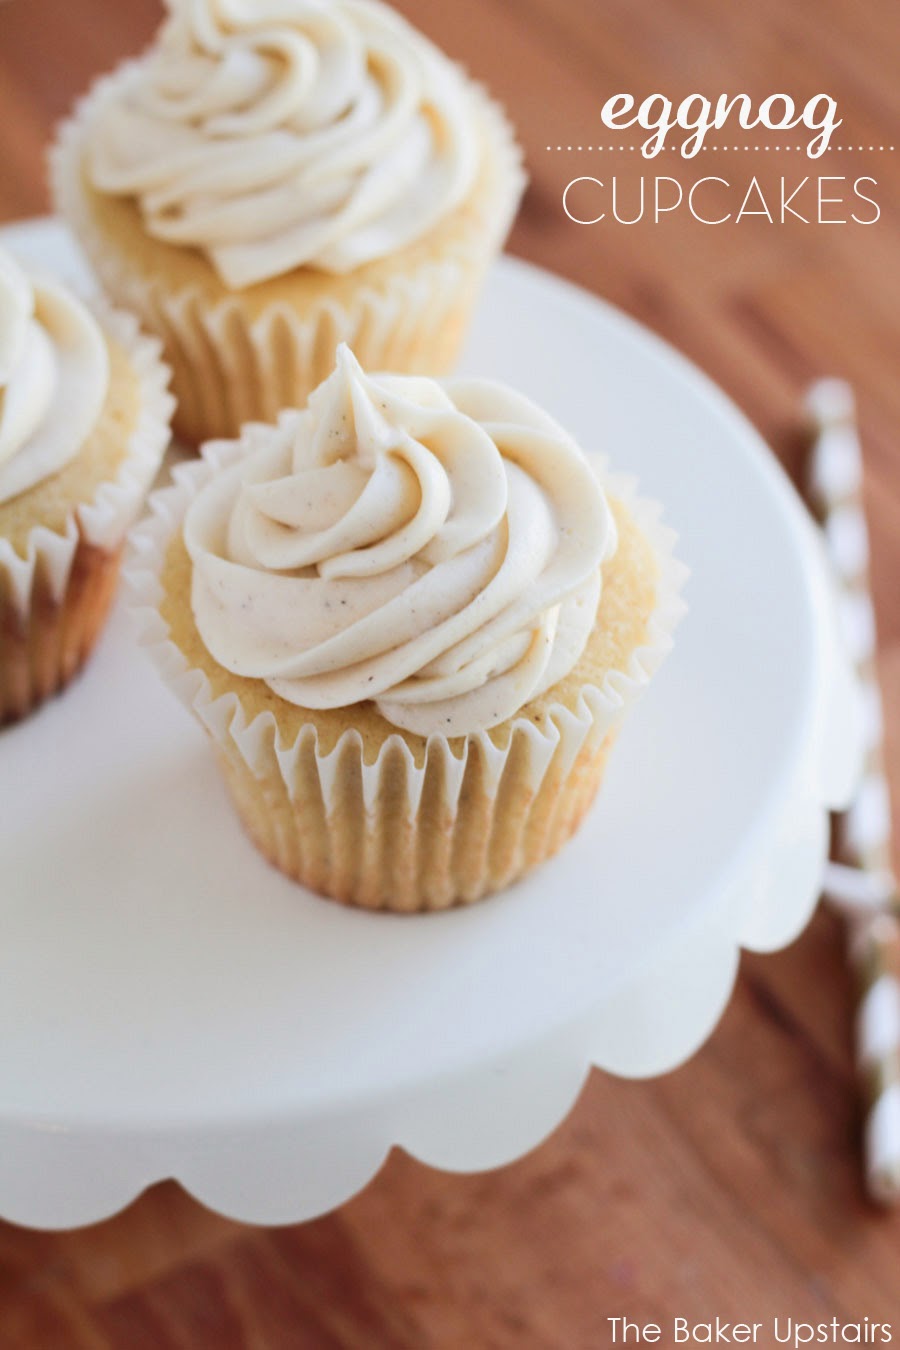 These deliciously sweet eggnog cupcakes are so light and fluffy, and are so easy to make! They have the perfect holiday flavor!